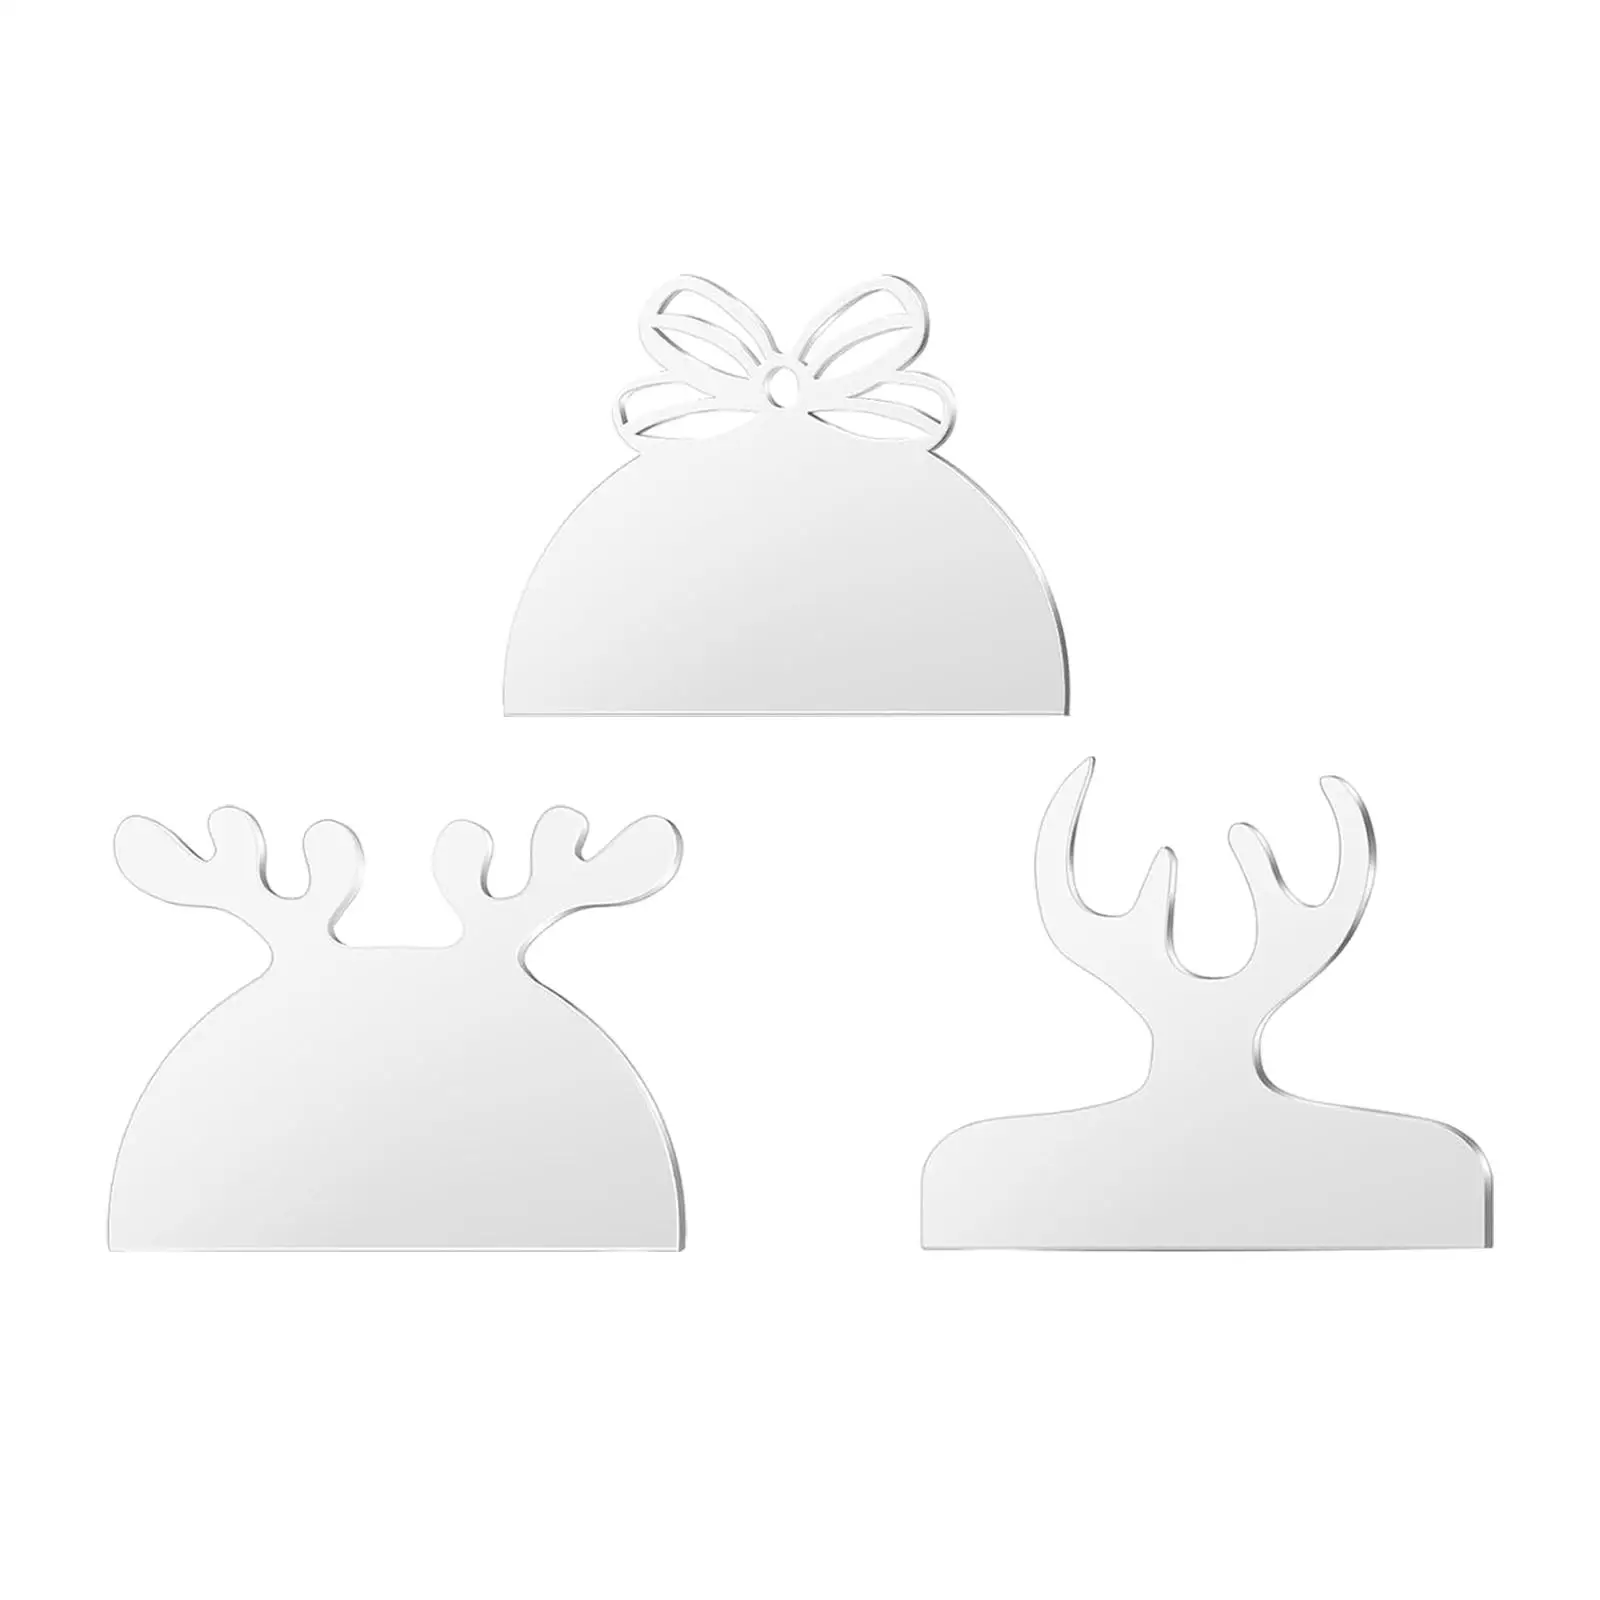 3Pcs Charcuterie Template Holiday Decorations Christmas Elk Router Templates Guide Tools Xmas Theme Cutting Board Stand Template